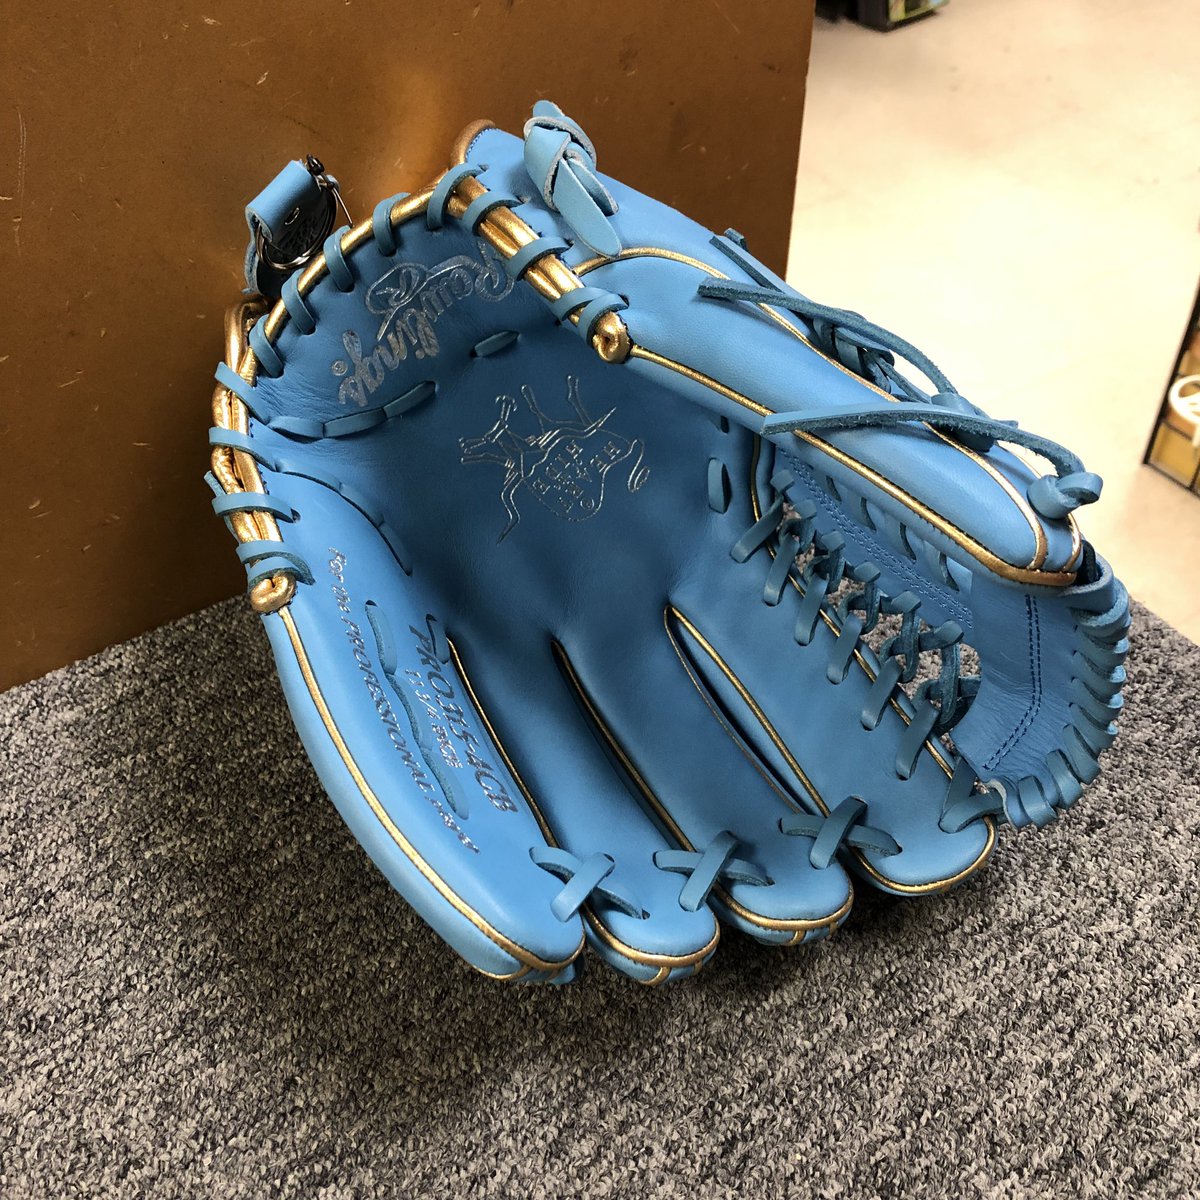 Play It Again Sports on X: We just got this babyblue Rawlings